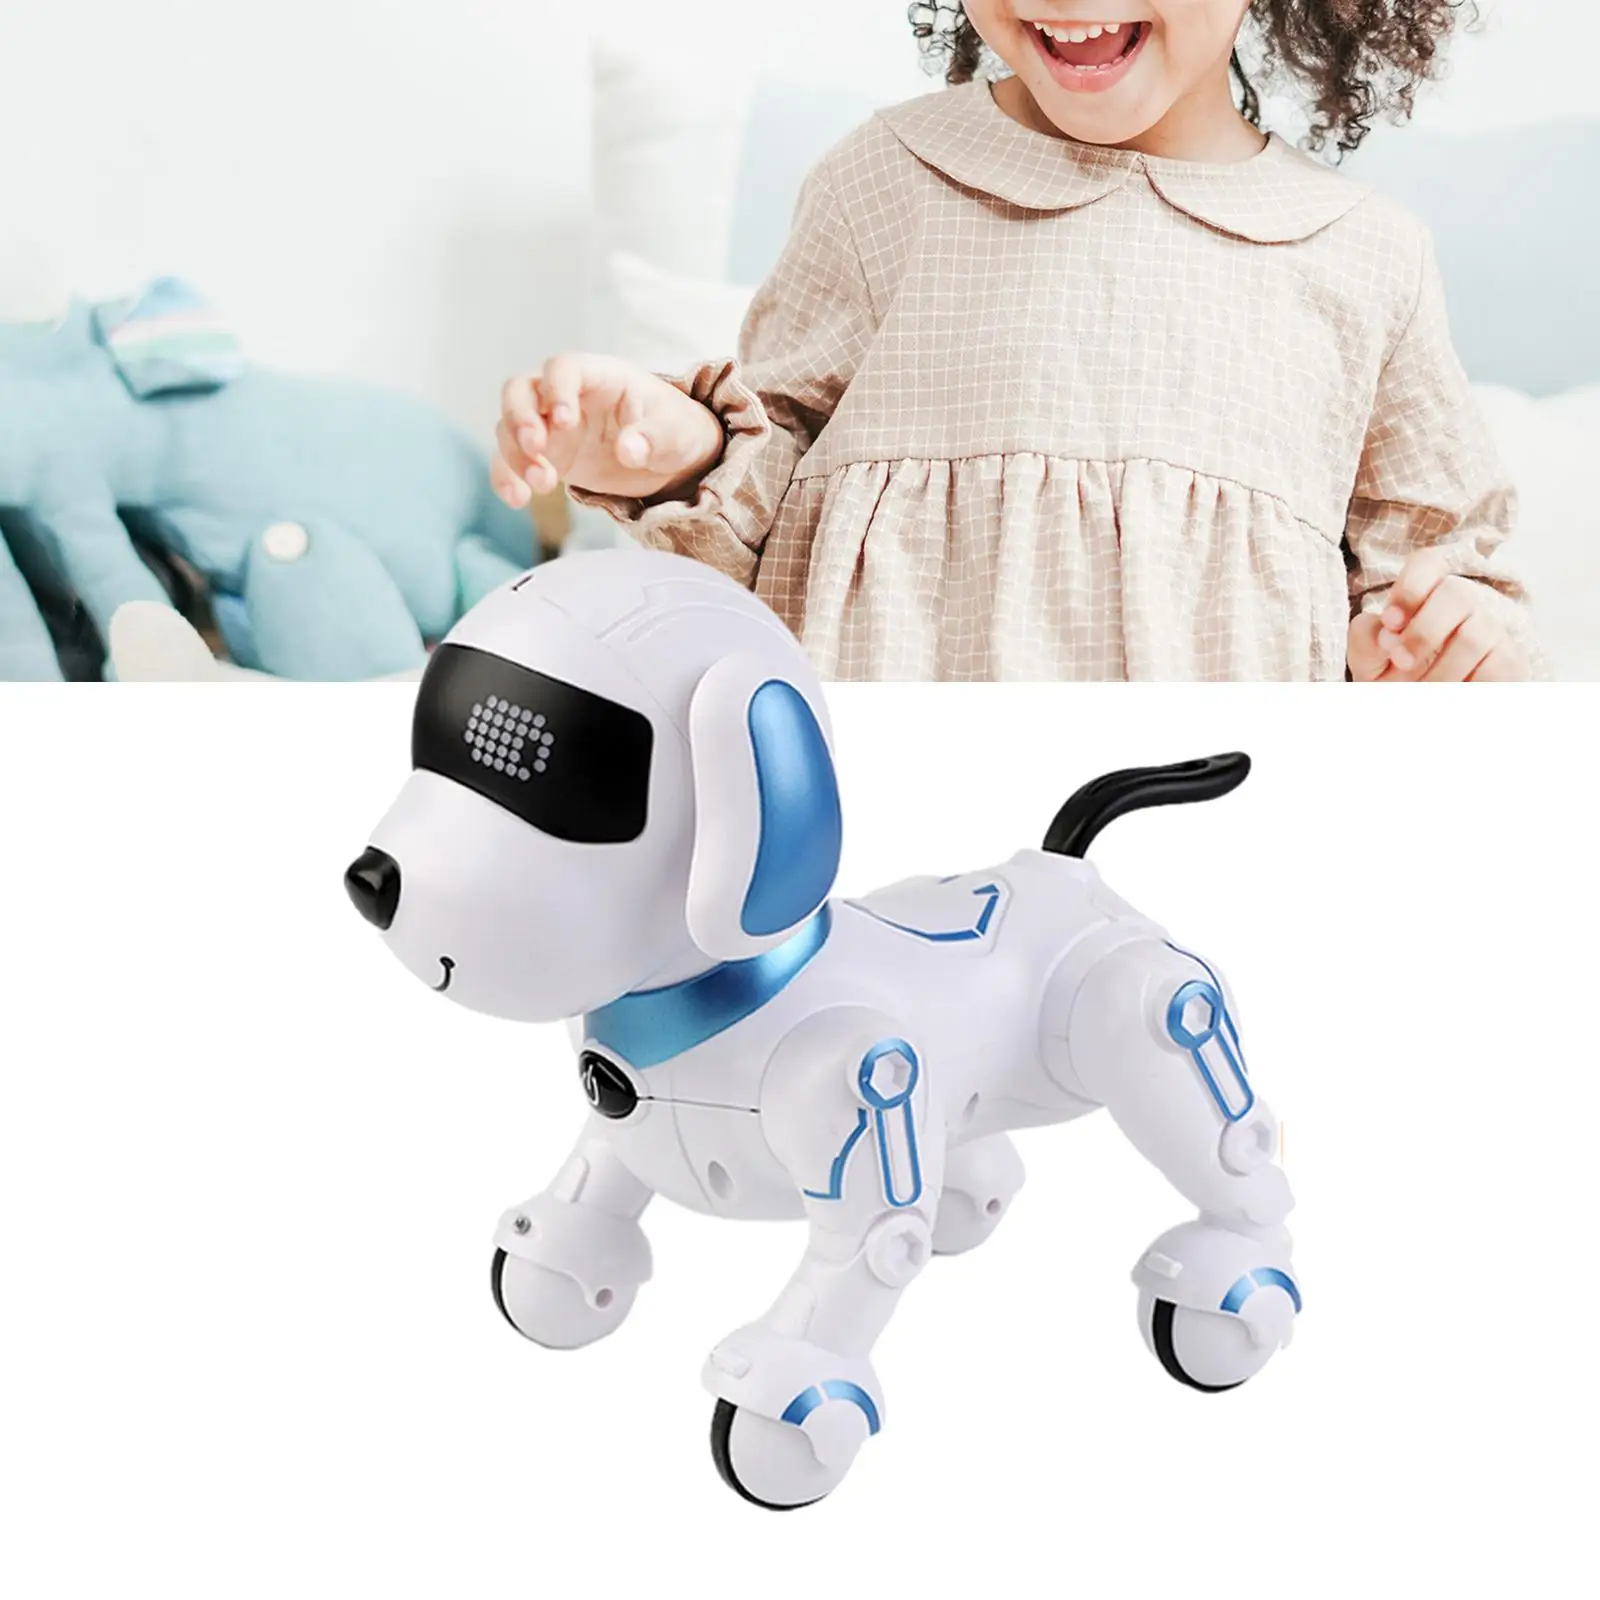 Remote Control Robot Dog Interactive Robotic Pet Backward with LED Eyes Dancing Smart Puppy for Teens and Girls Children Kids